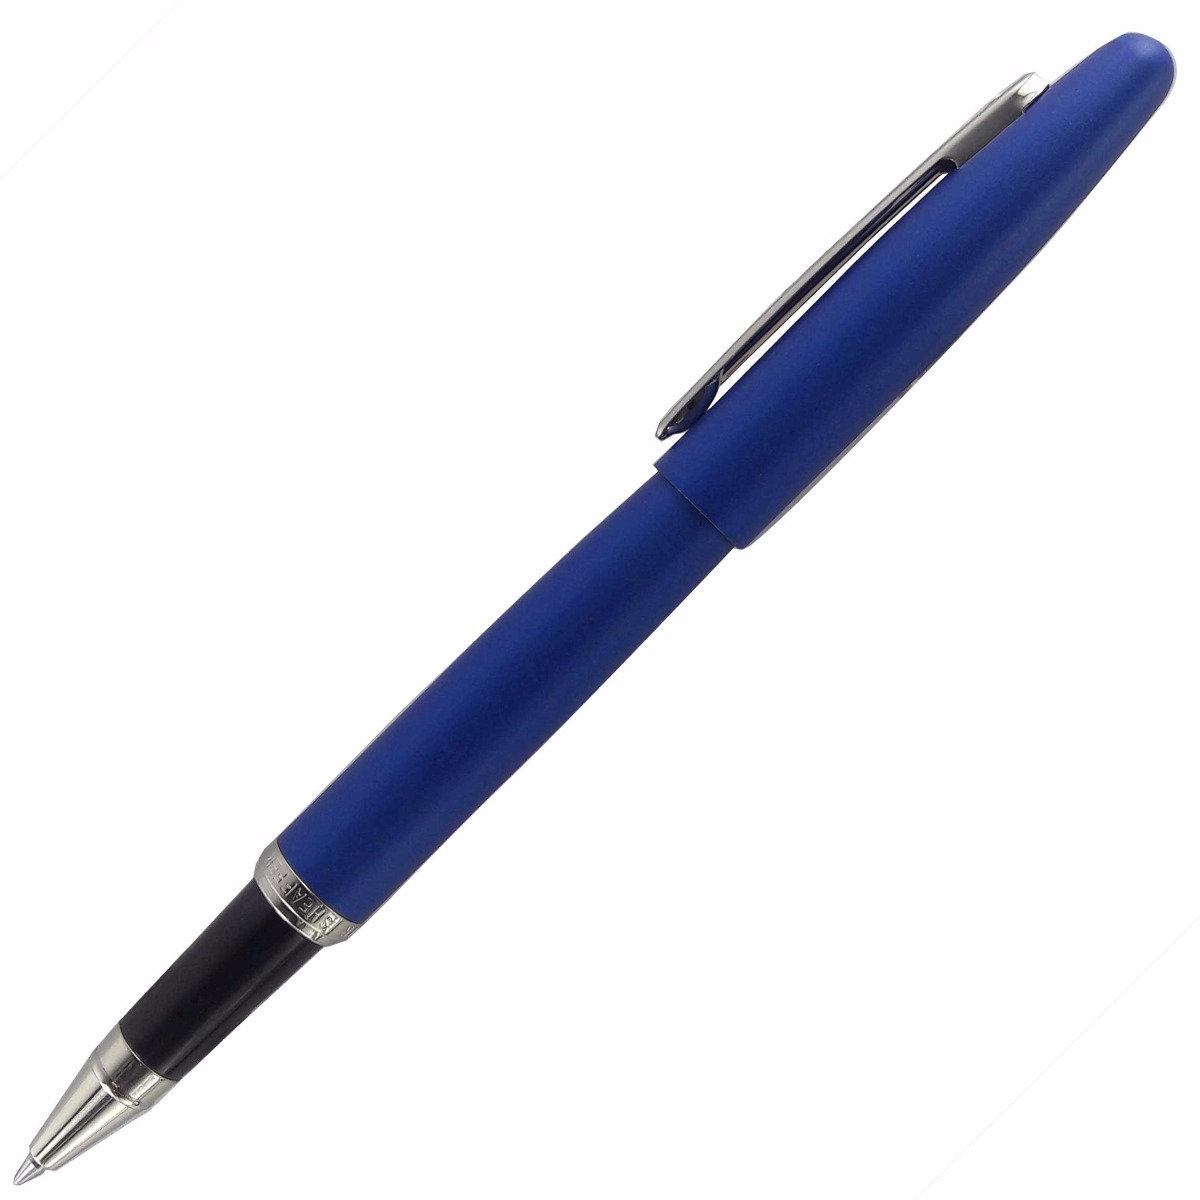 SHEAFFER 9401 BLUE COLOR BODY WITH MAT FINISH WITH SILVER CLIP CAP TYPE ROLLER BALL PEN MODEL: 13011